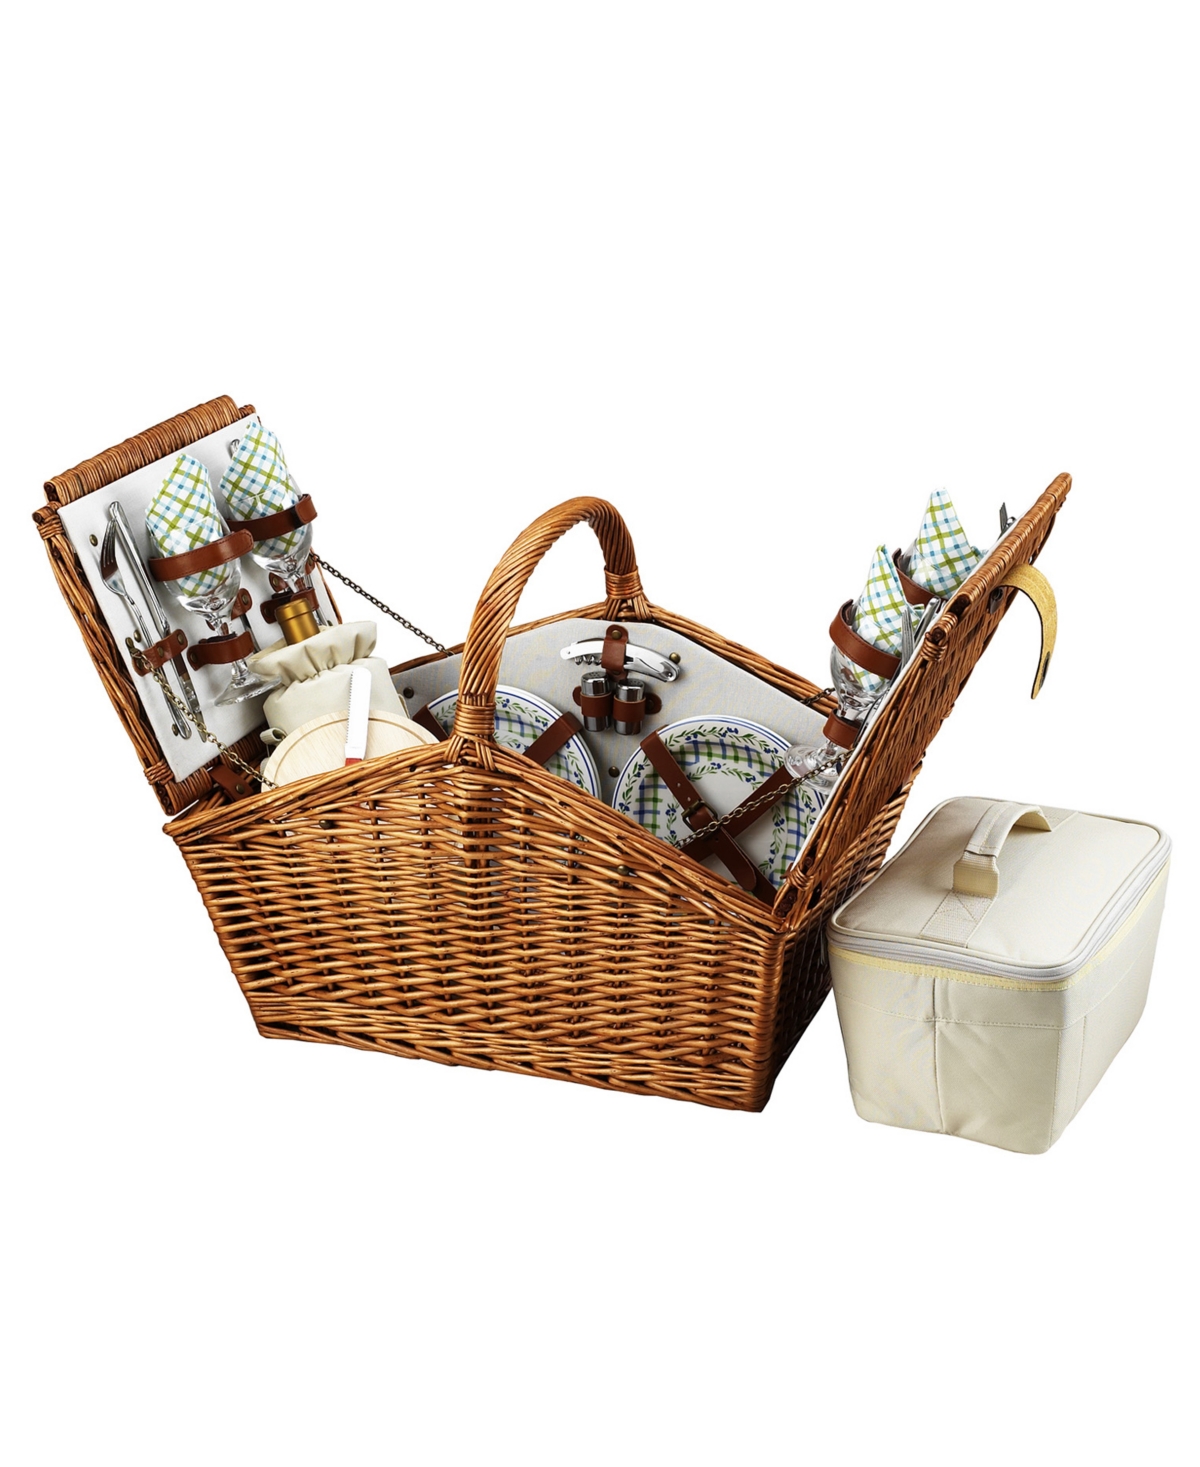 Huntsman English-Style Willow Picnic Basket with Service for 4 - Turquoise